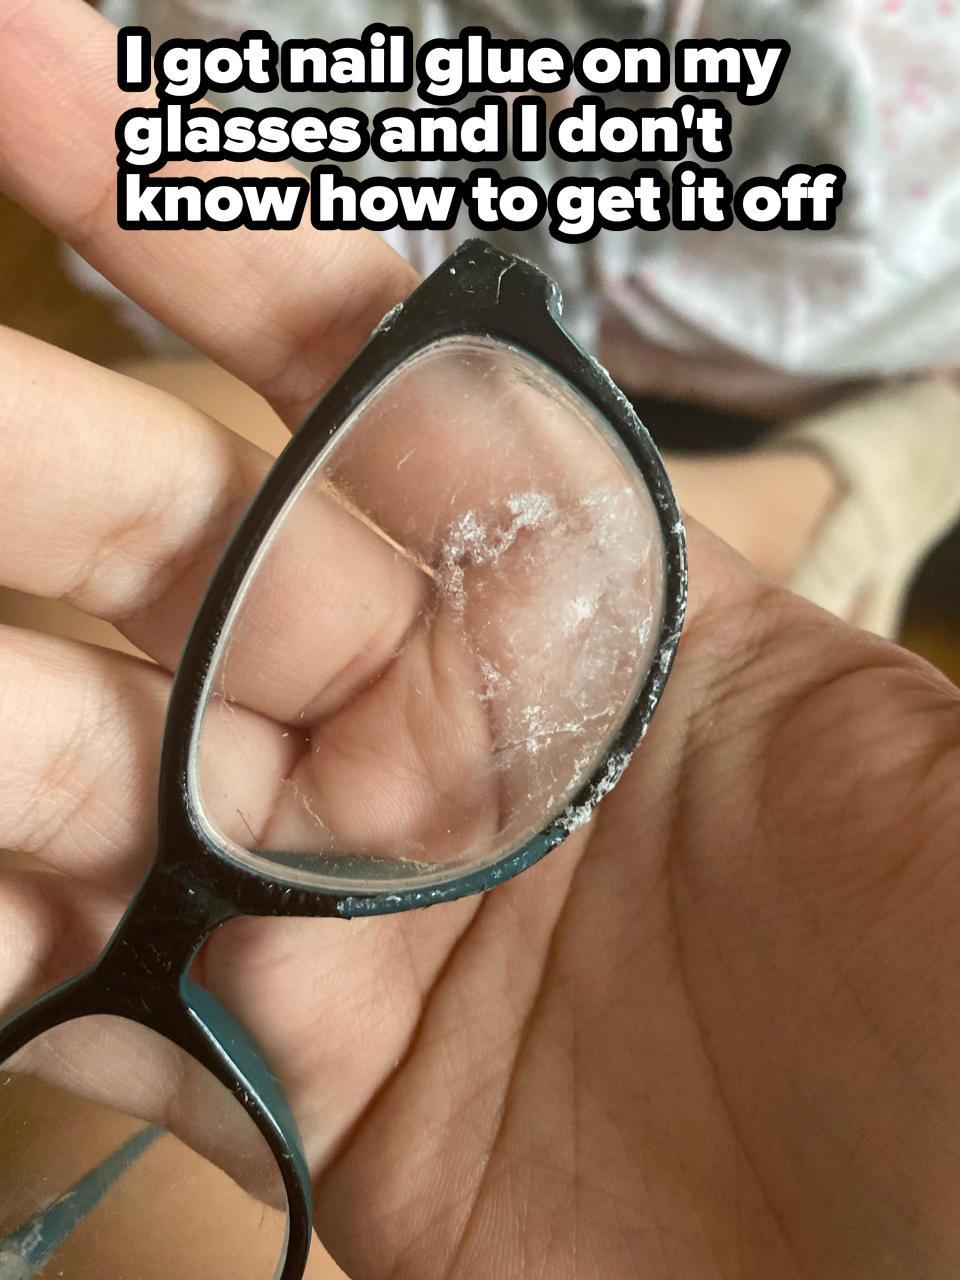 glasses with glue on them and the words "I got nail glue on my glasses and I don't know how to get it off"